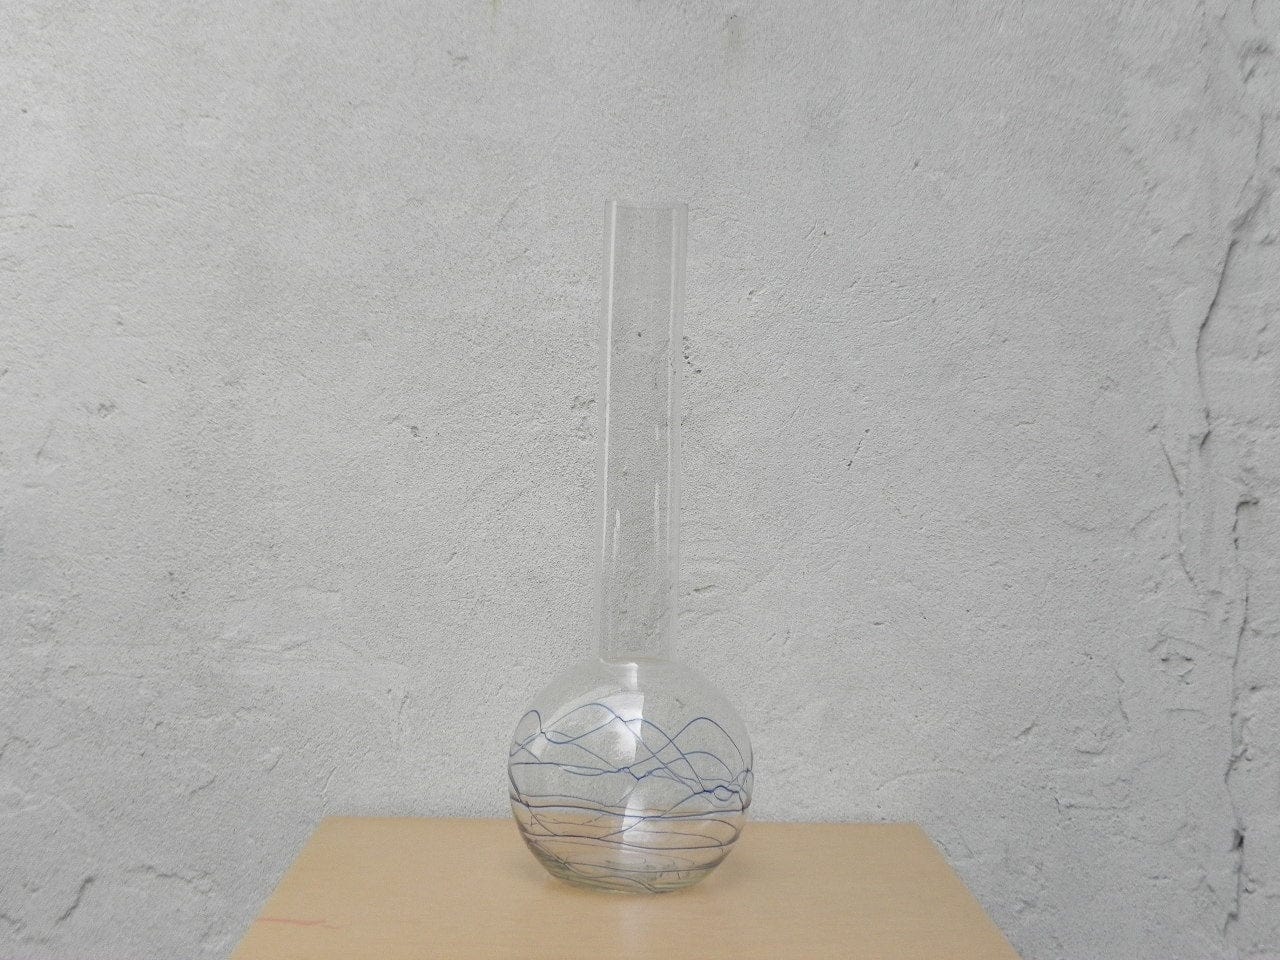 I Like Mike's Mid Century Modern Accessories Very Tall Clear Glass Long Neck Vase with Blue Swirl